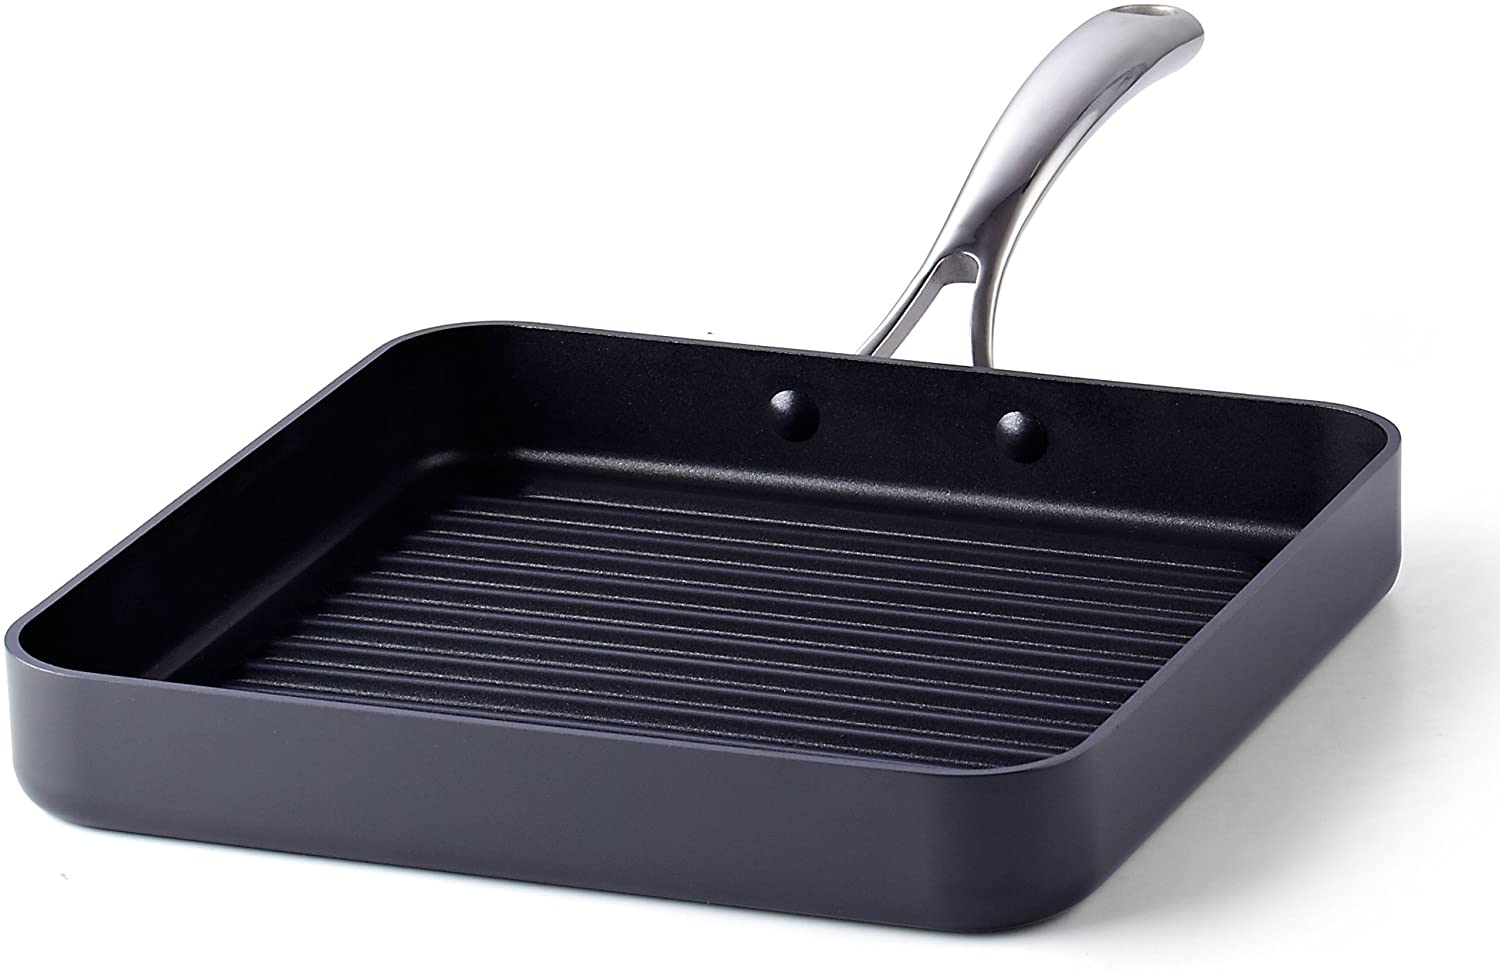 All-Clad HA1 Hard Anodized Nonstick Cookware, Square Grill, 11 inch